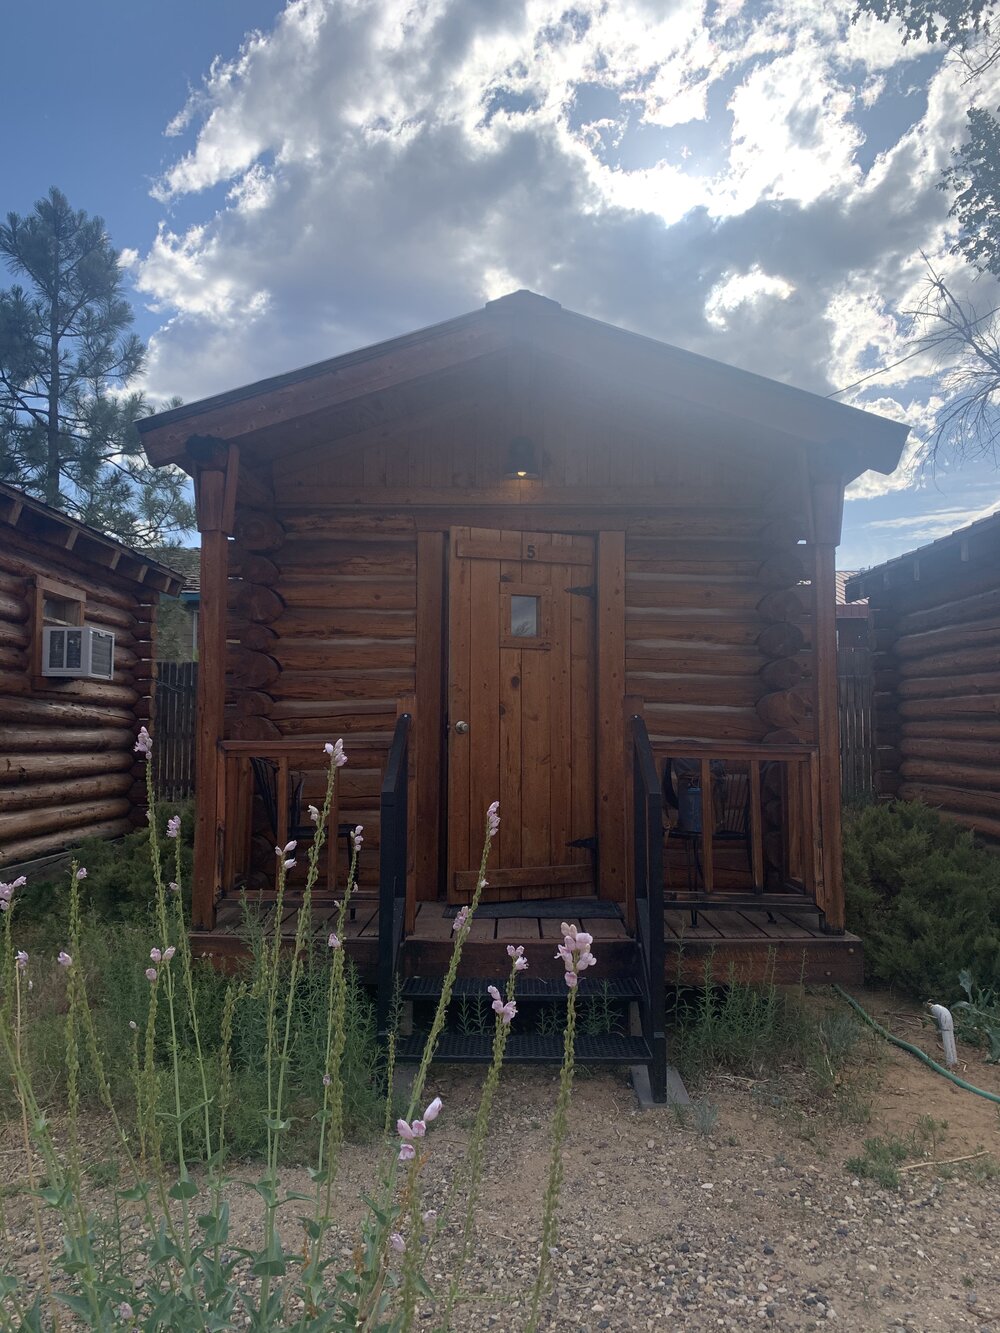  Our humble abode at Escalante Outfitters 